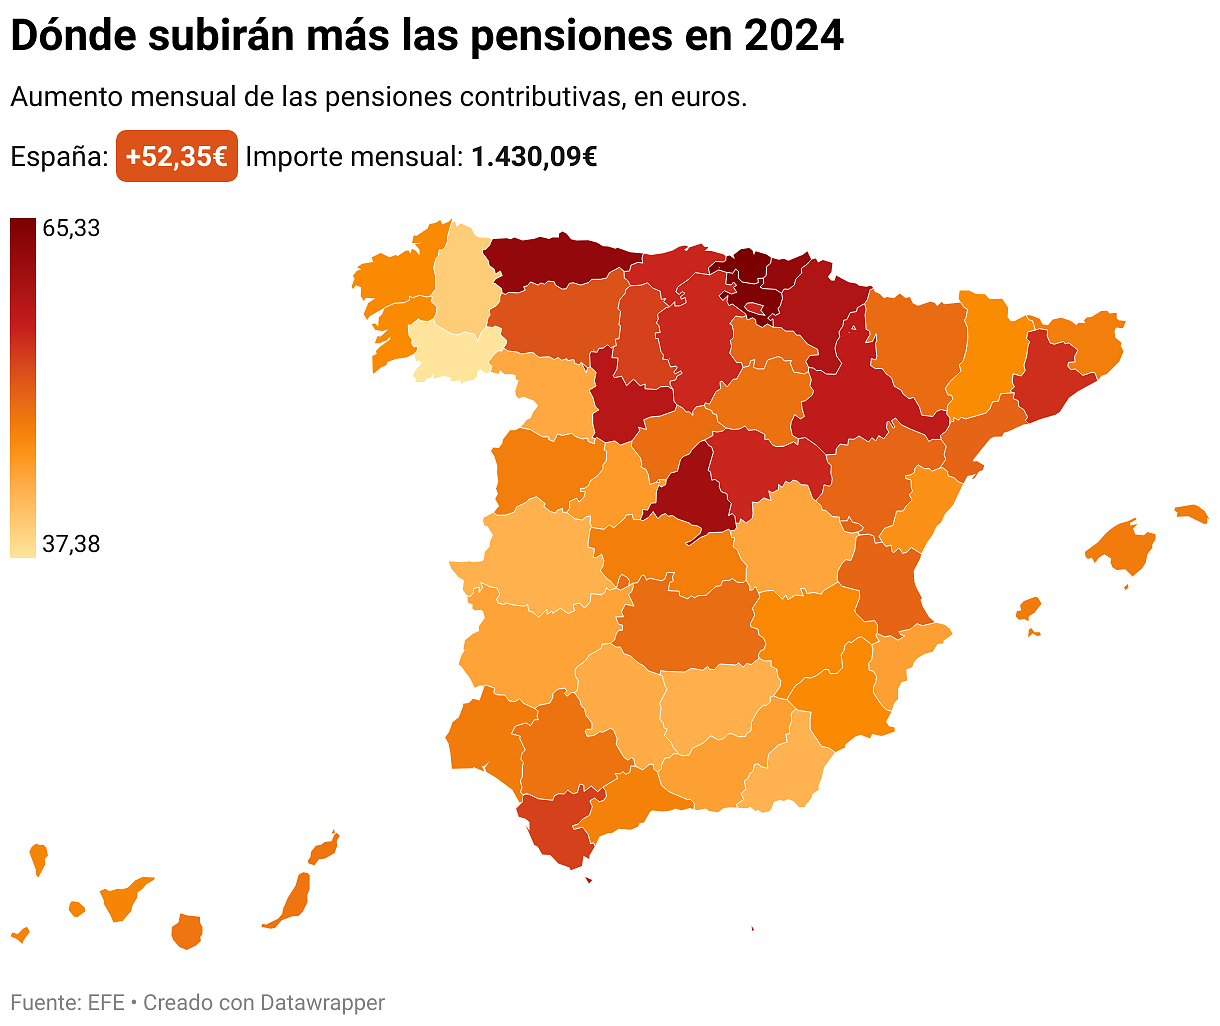 This is how the increase in contributory pensions will look in 2024 in each province and autonomous community